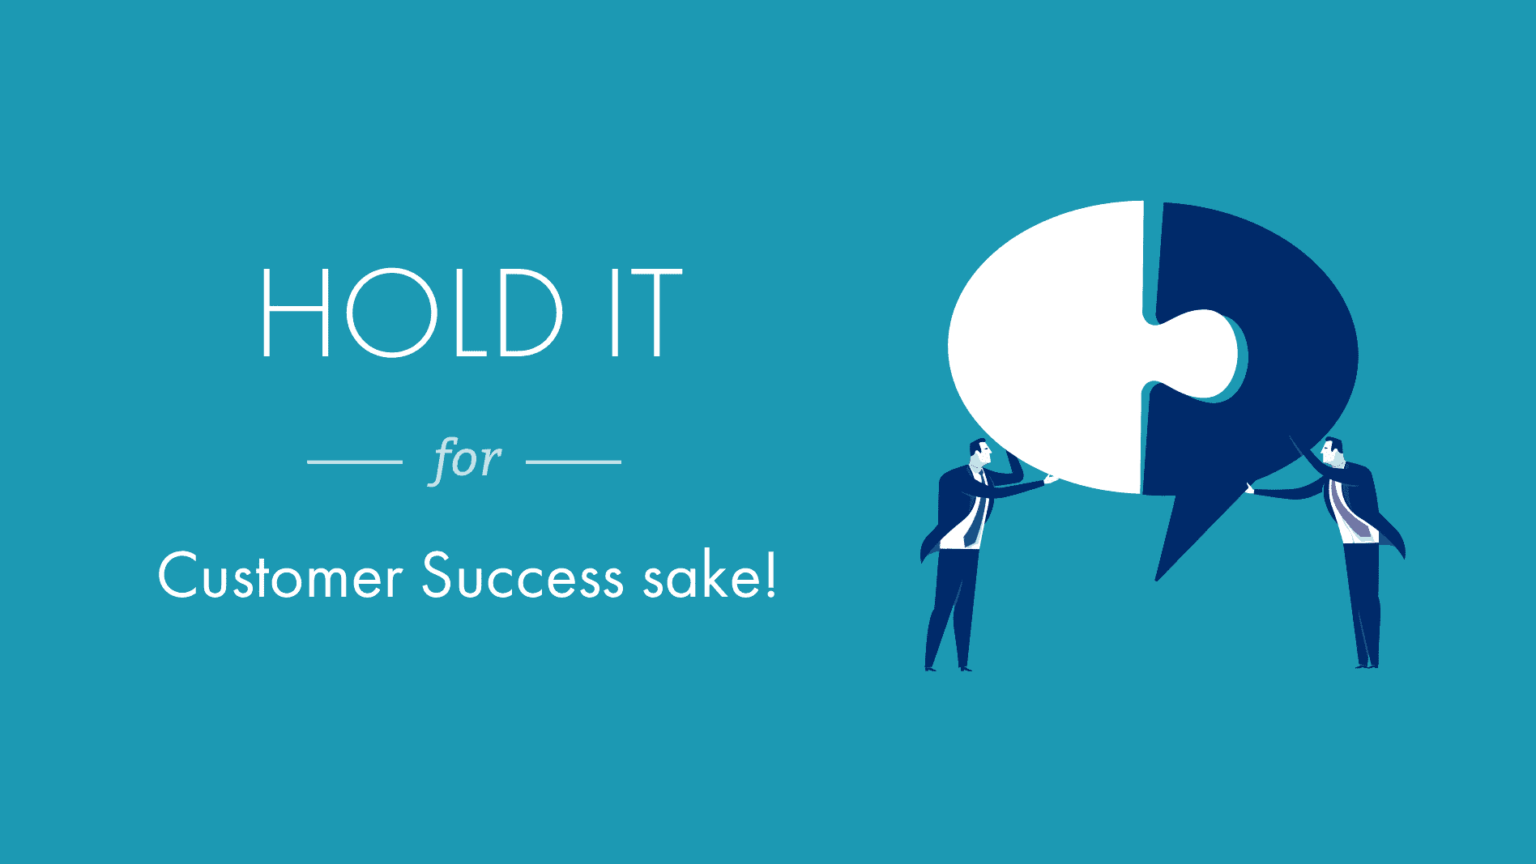 Client Success: How We Get You To The “Ah-HA” Moment